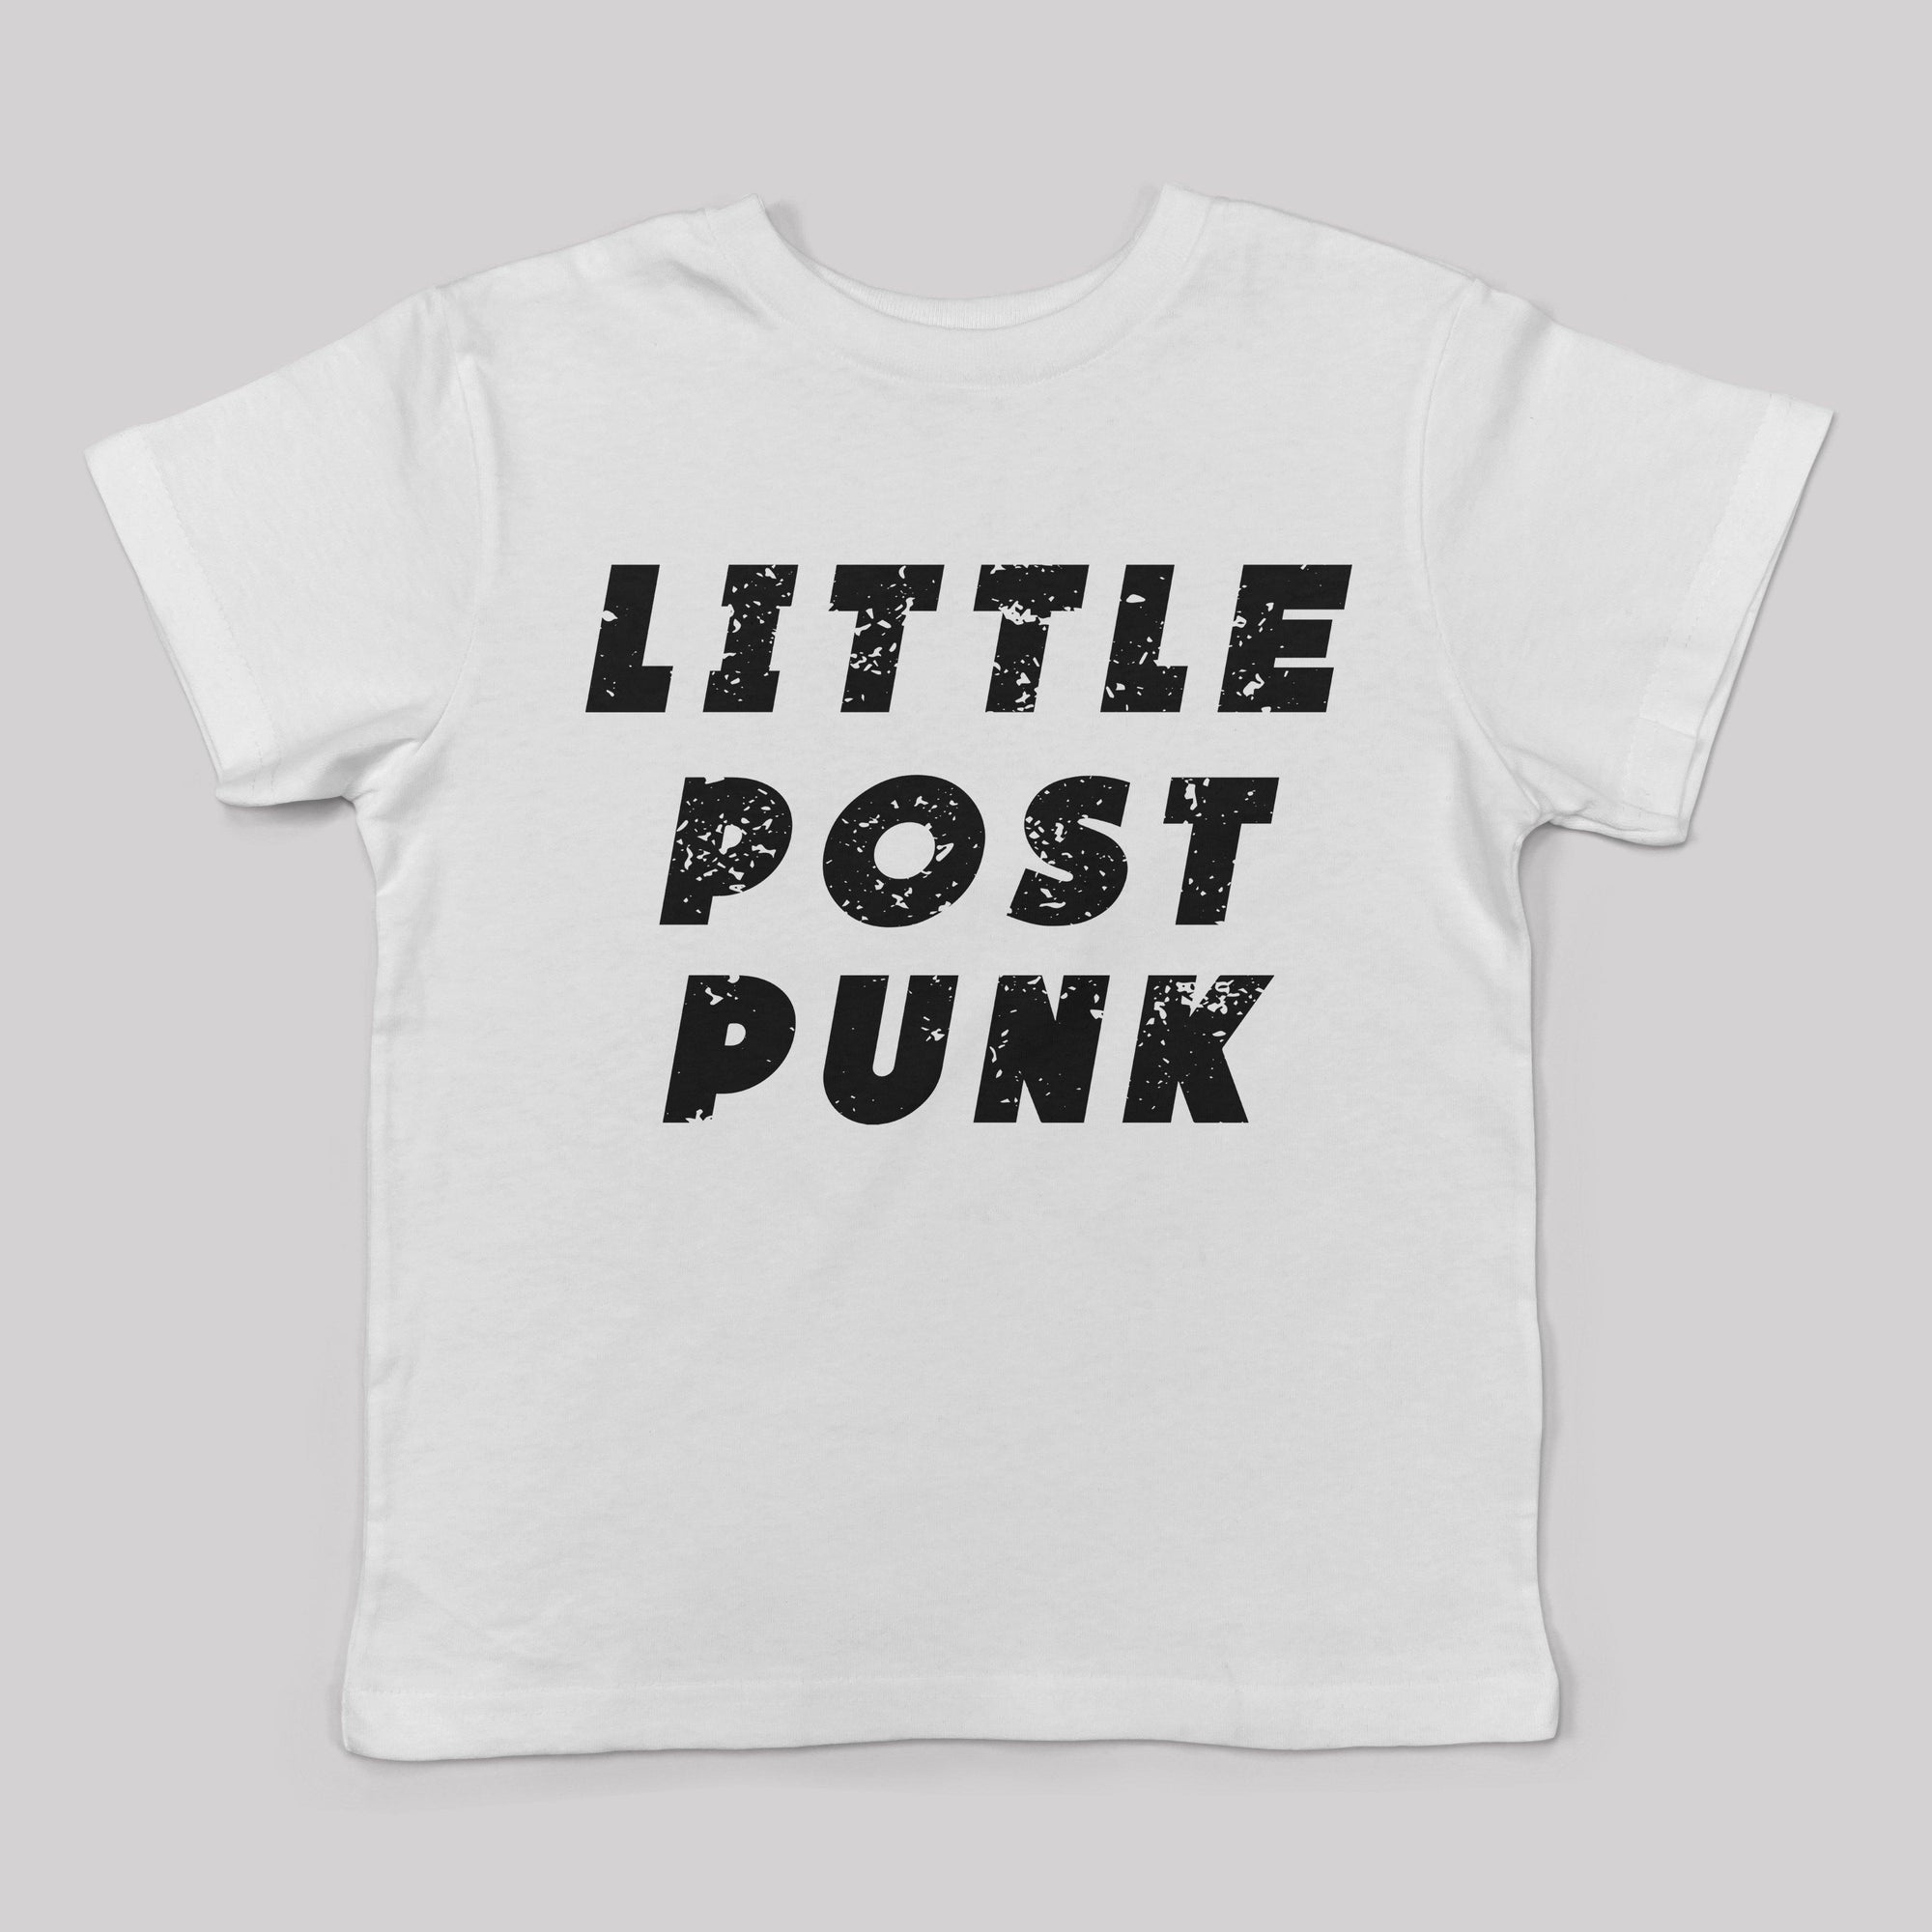 "Little Post Punk" Tee for Kids - Baby Teith